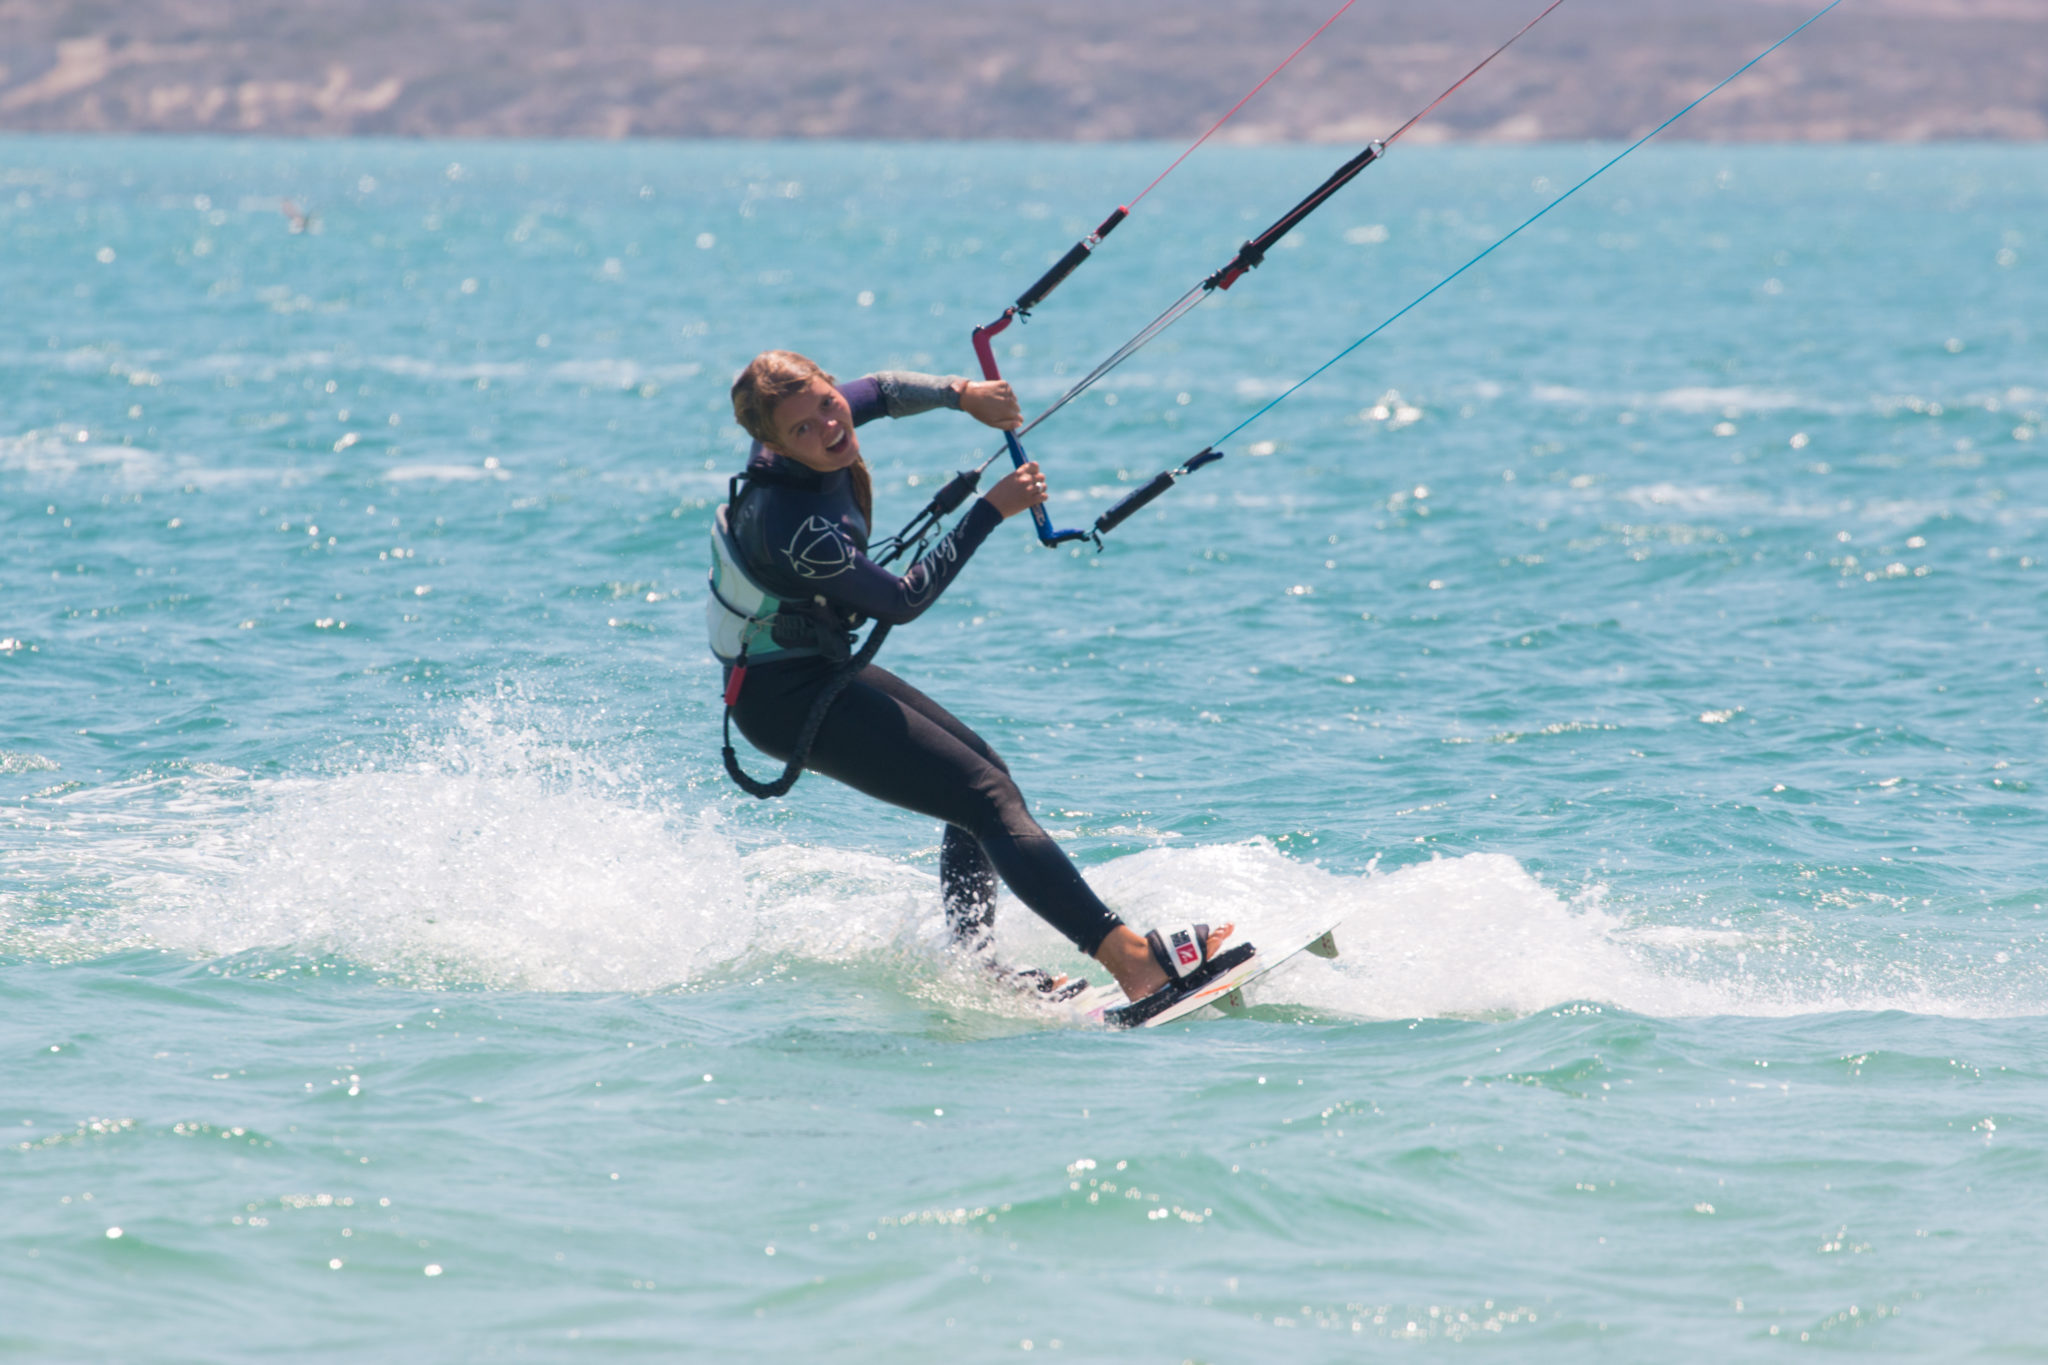 Kitesurf is another passion of mine - About me - Tremento Hospitality Marketing